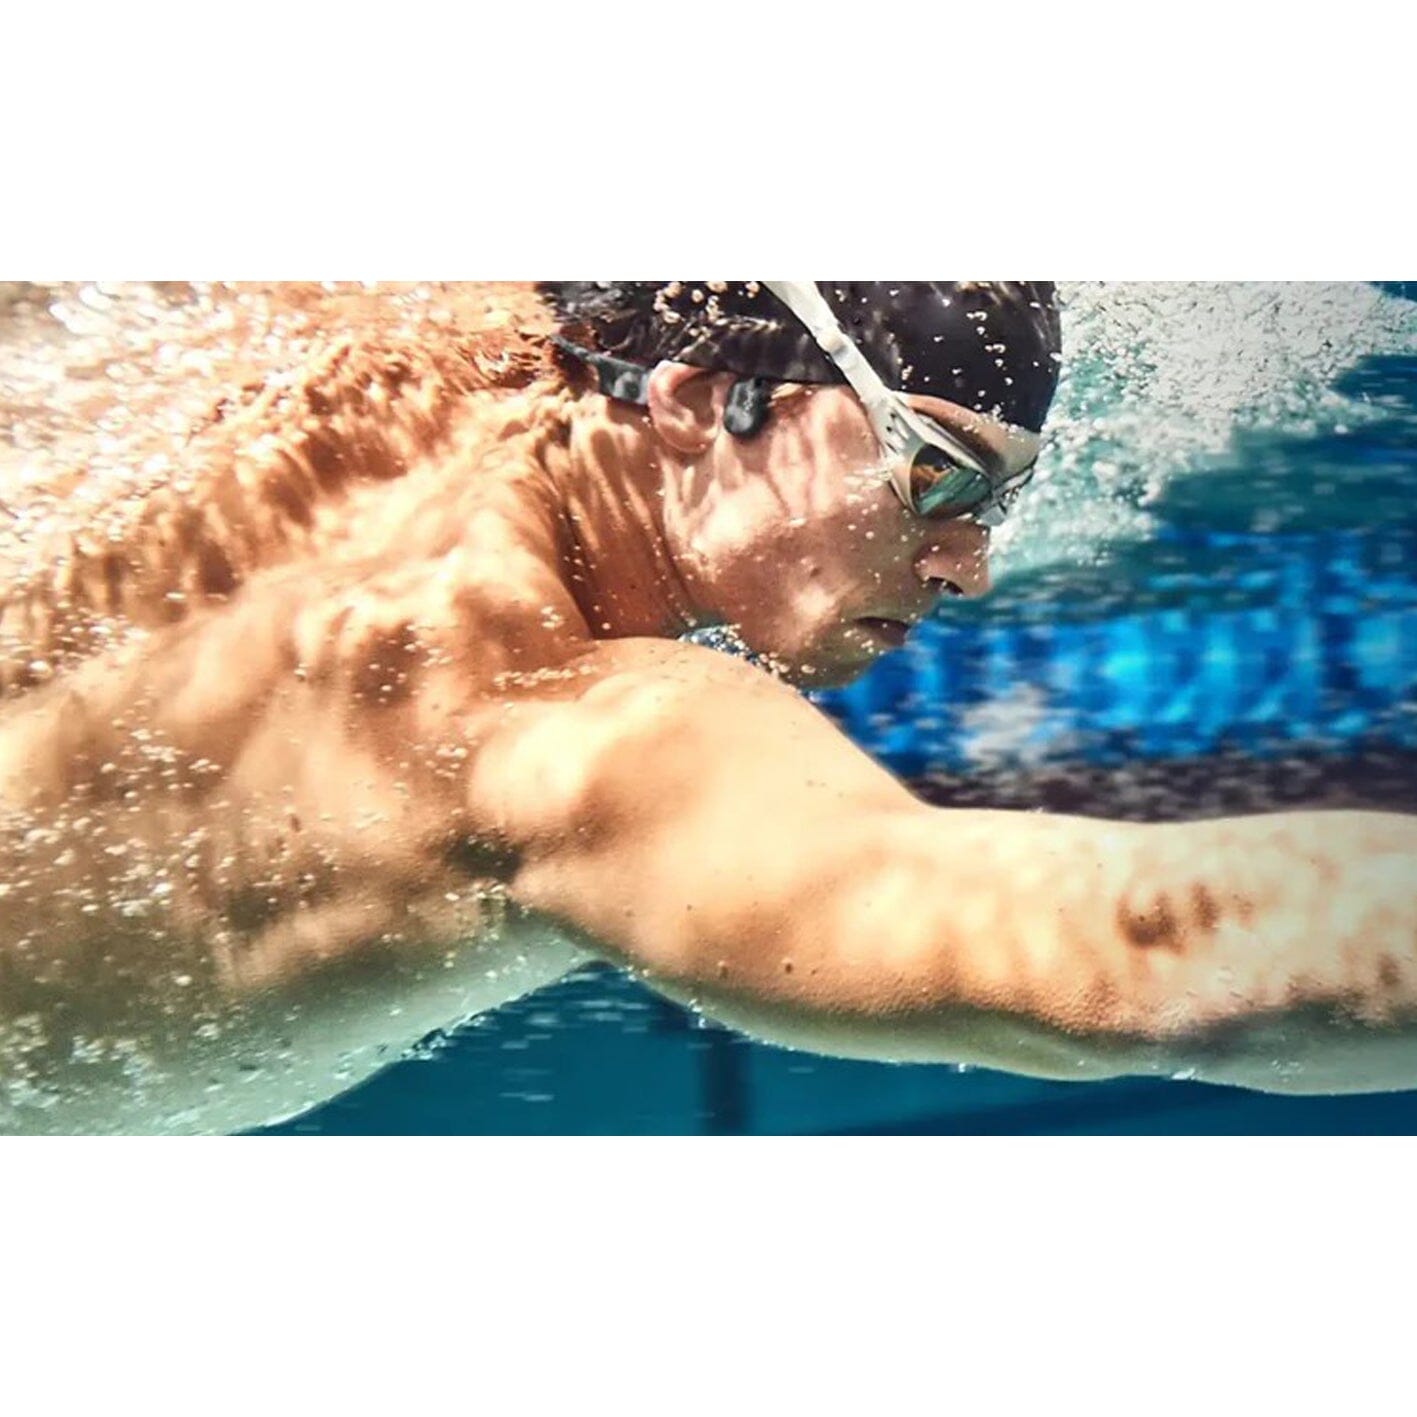 I've been swimming with the Shokz Openswim headphones — and they've  revolutionized my workouts